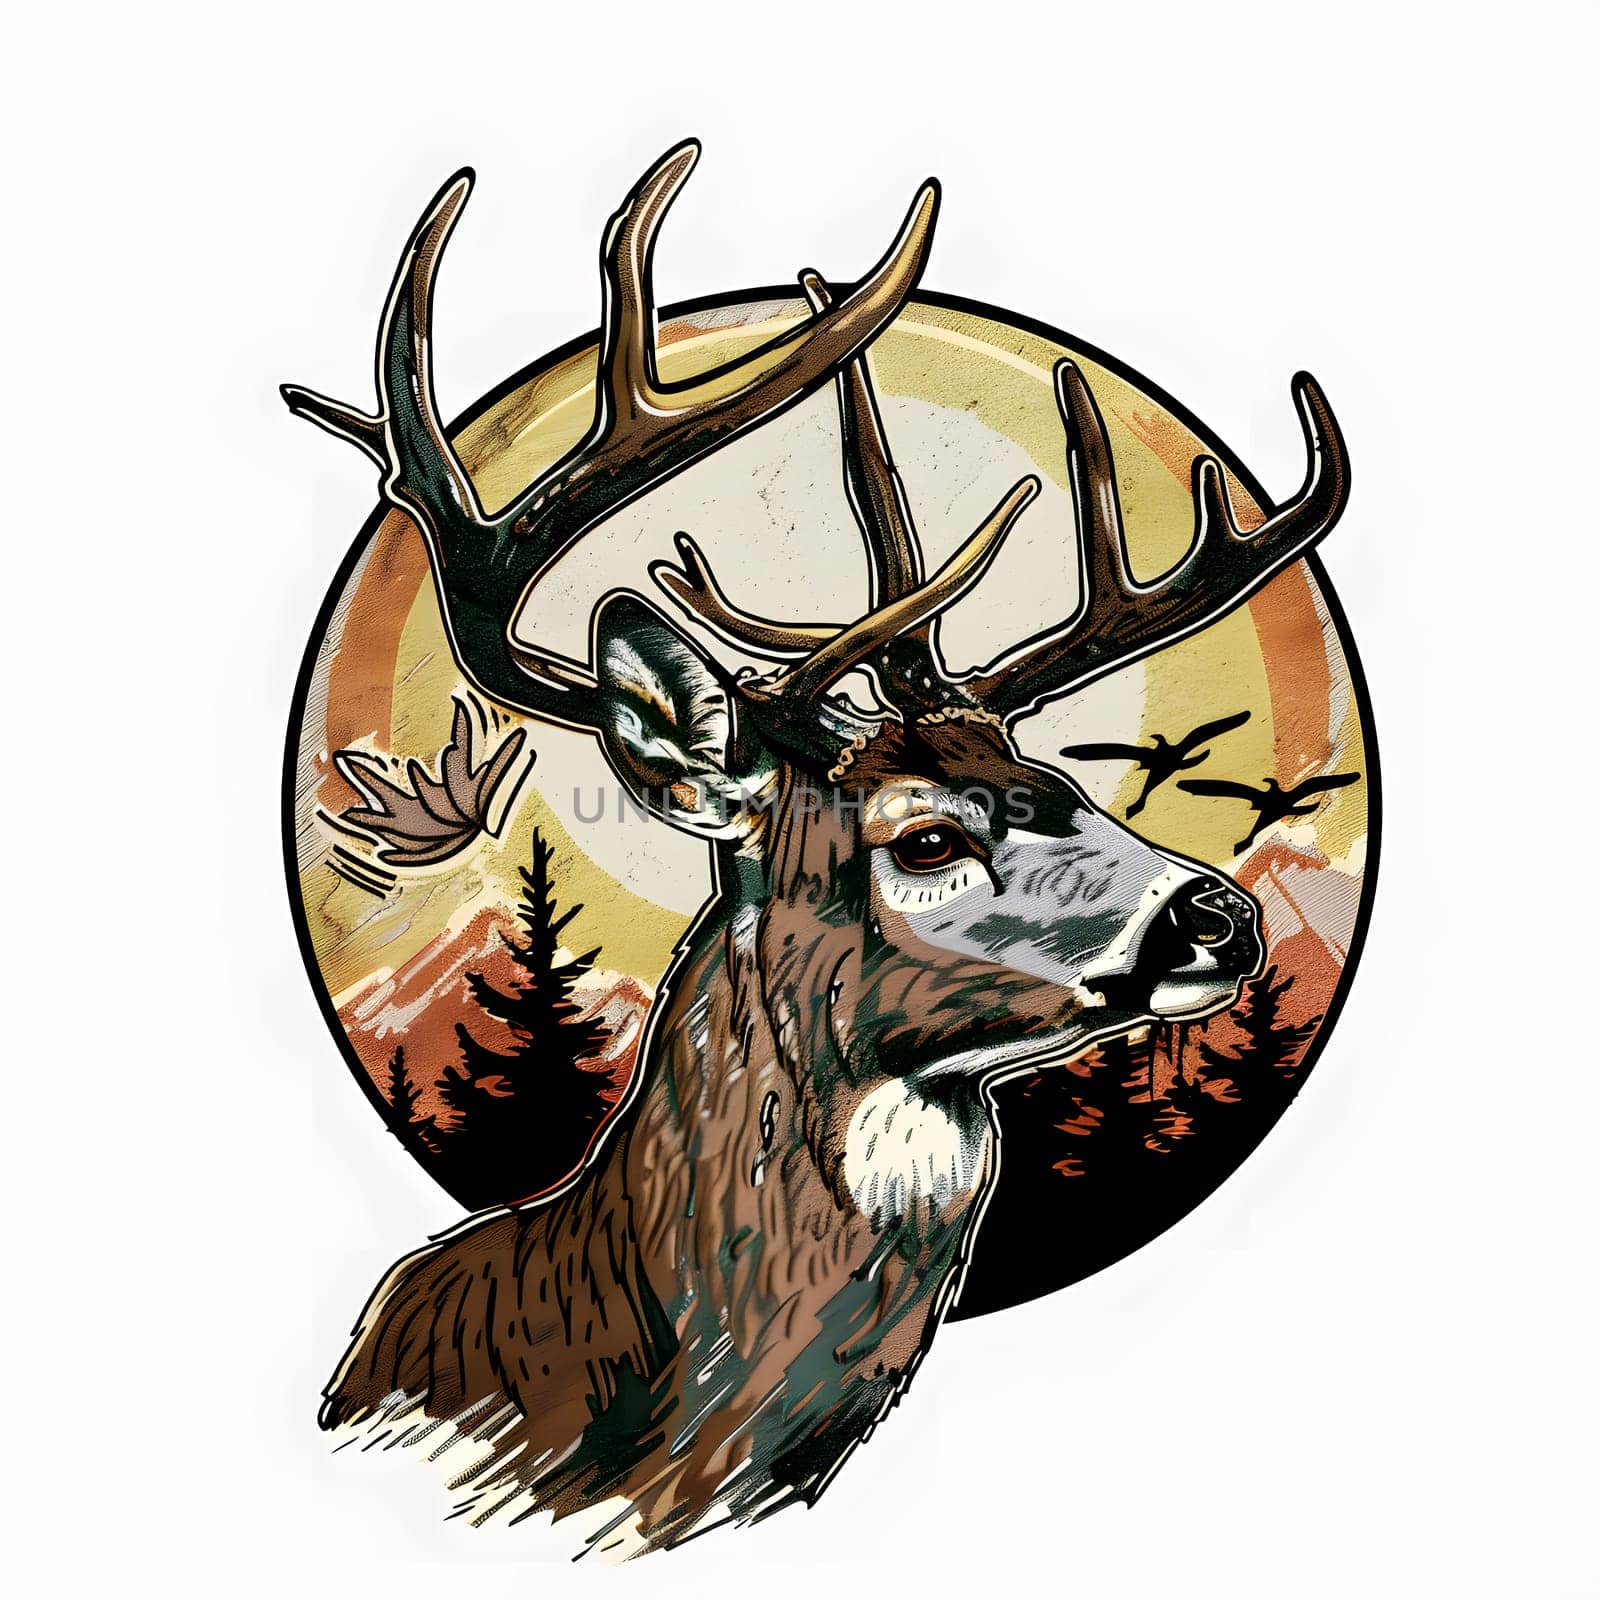 A majestic elk with antlers is depicted in a circle, set against a backdrop of mountains. The artwork showcases the beauty of nature and wildlife